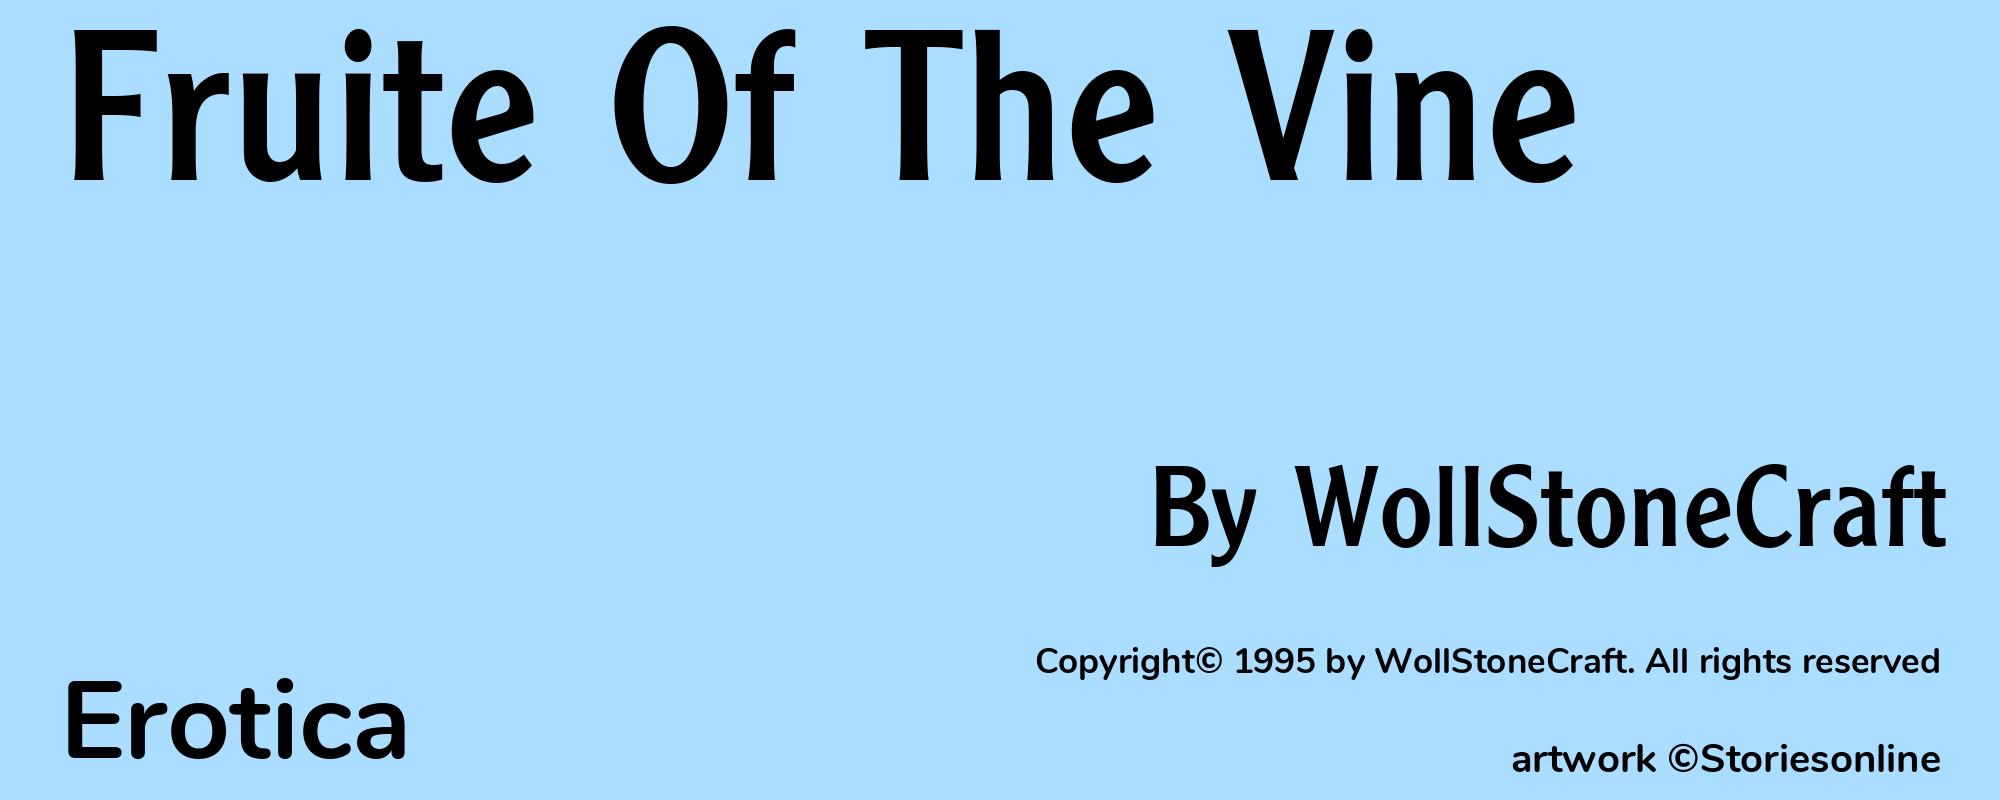 Fruite Of The Vine - Cover